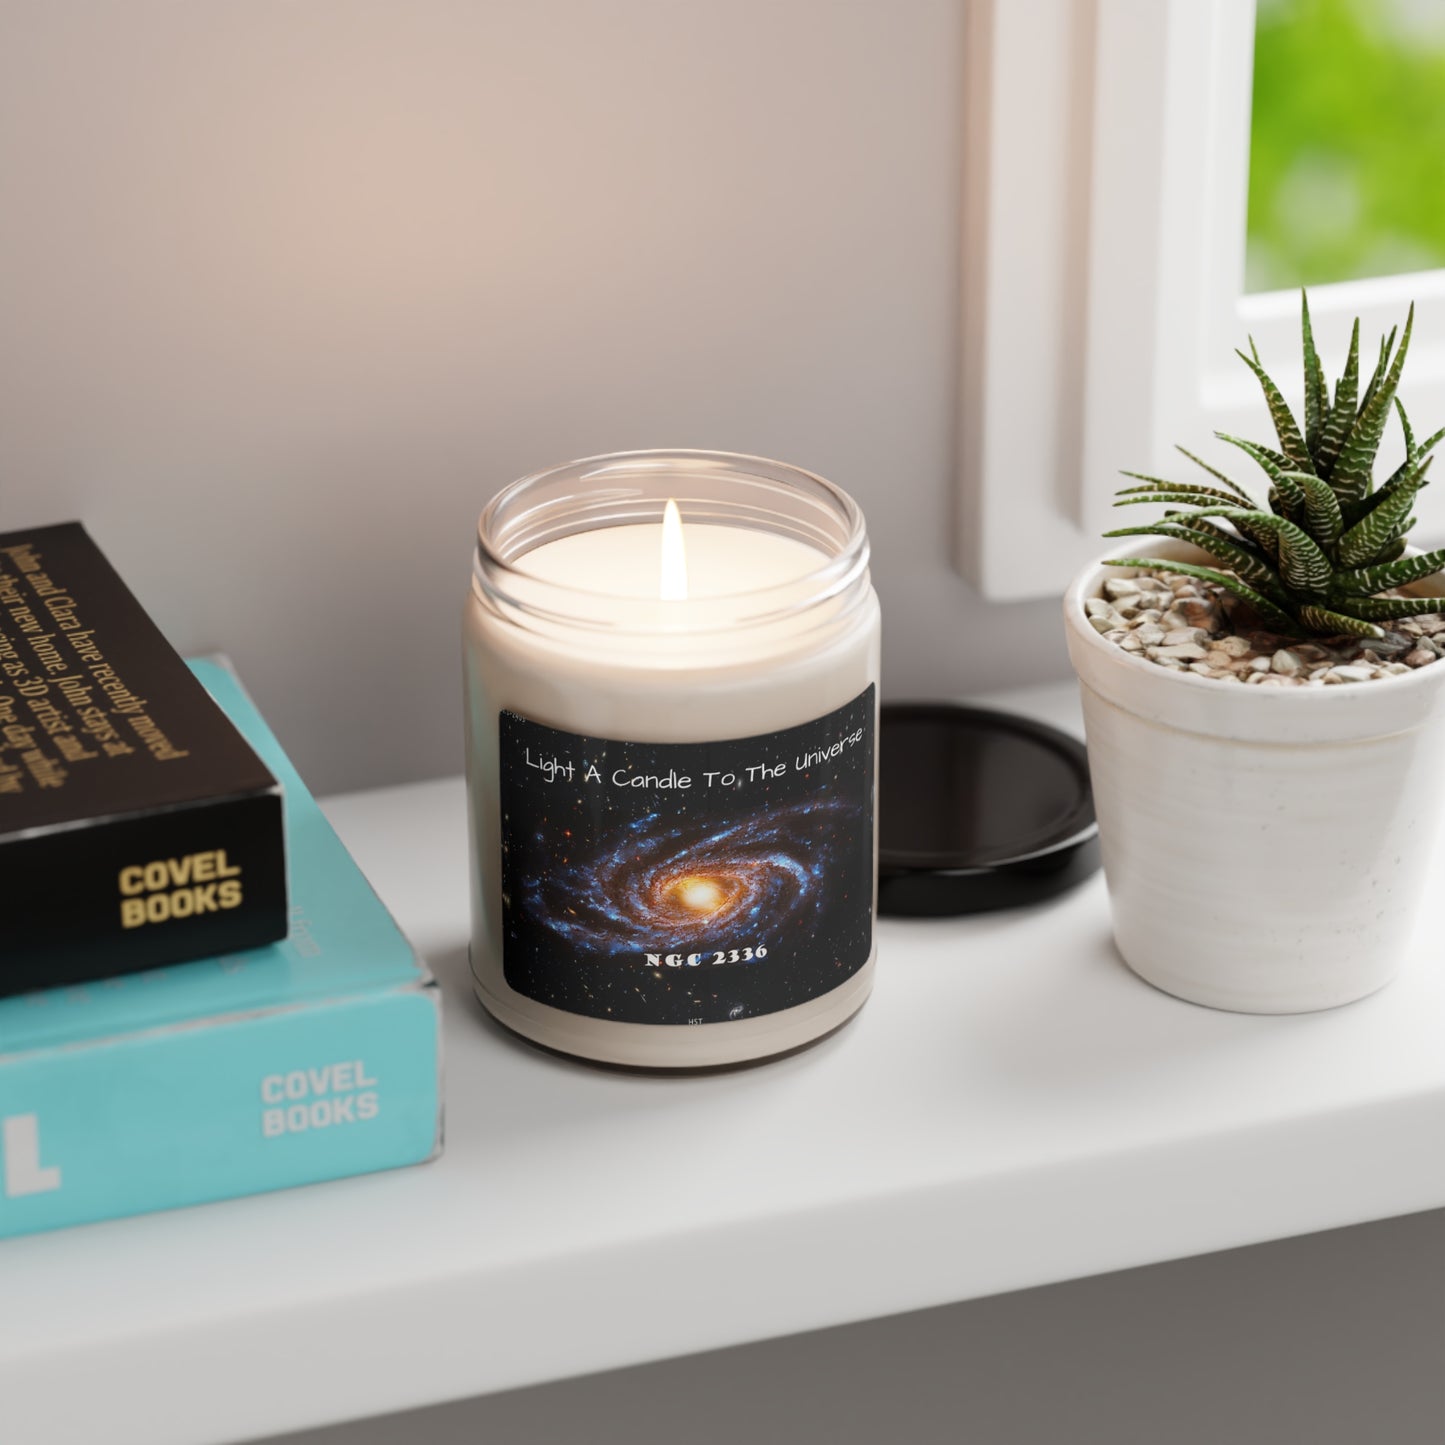 Cosmos Series 14 NGC2336-galaxy Scented Soy Candle, 9oz